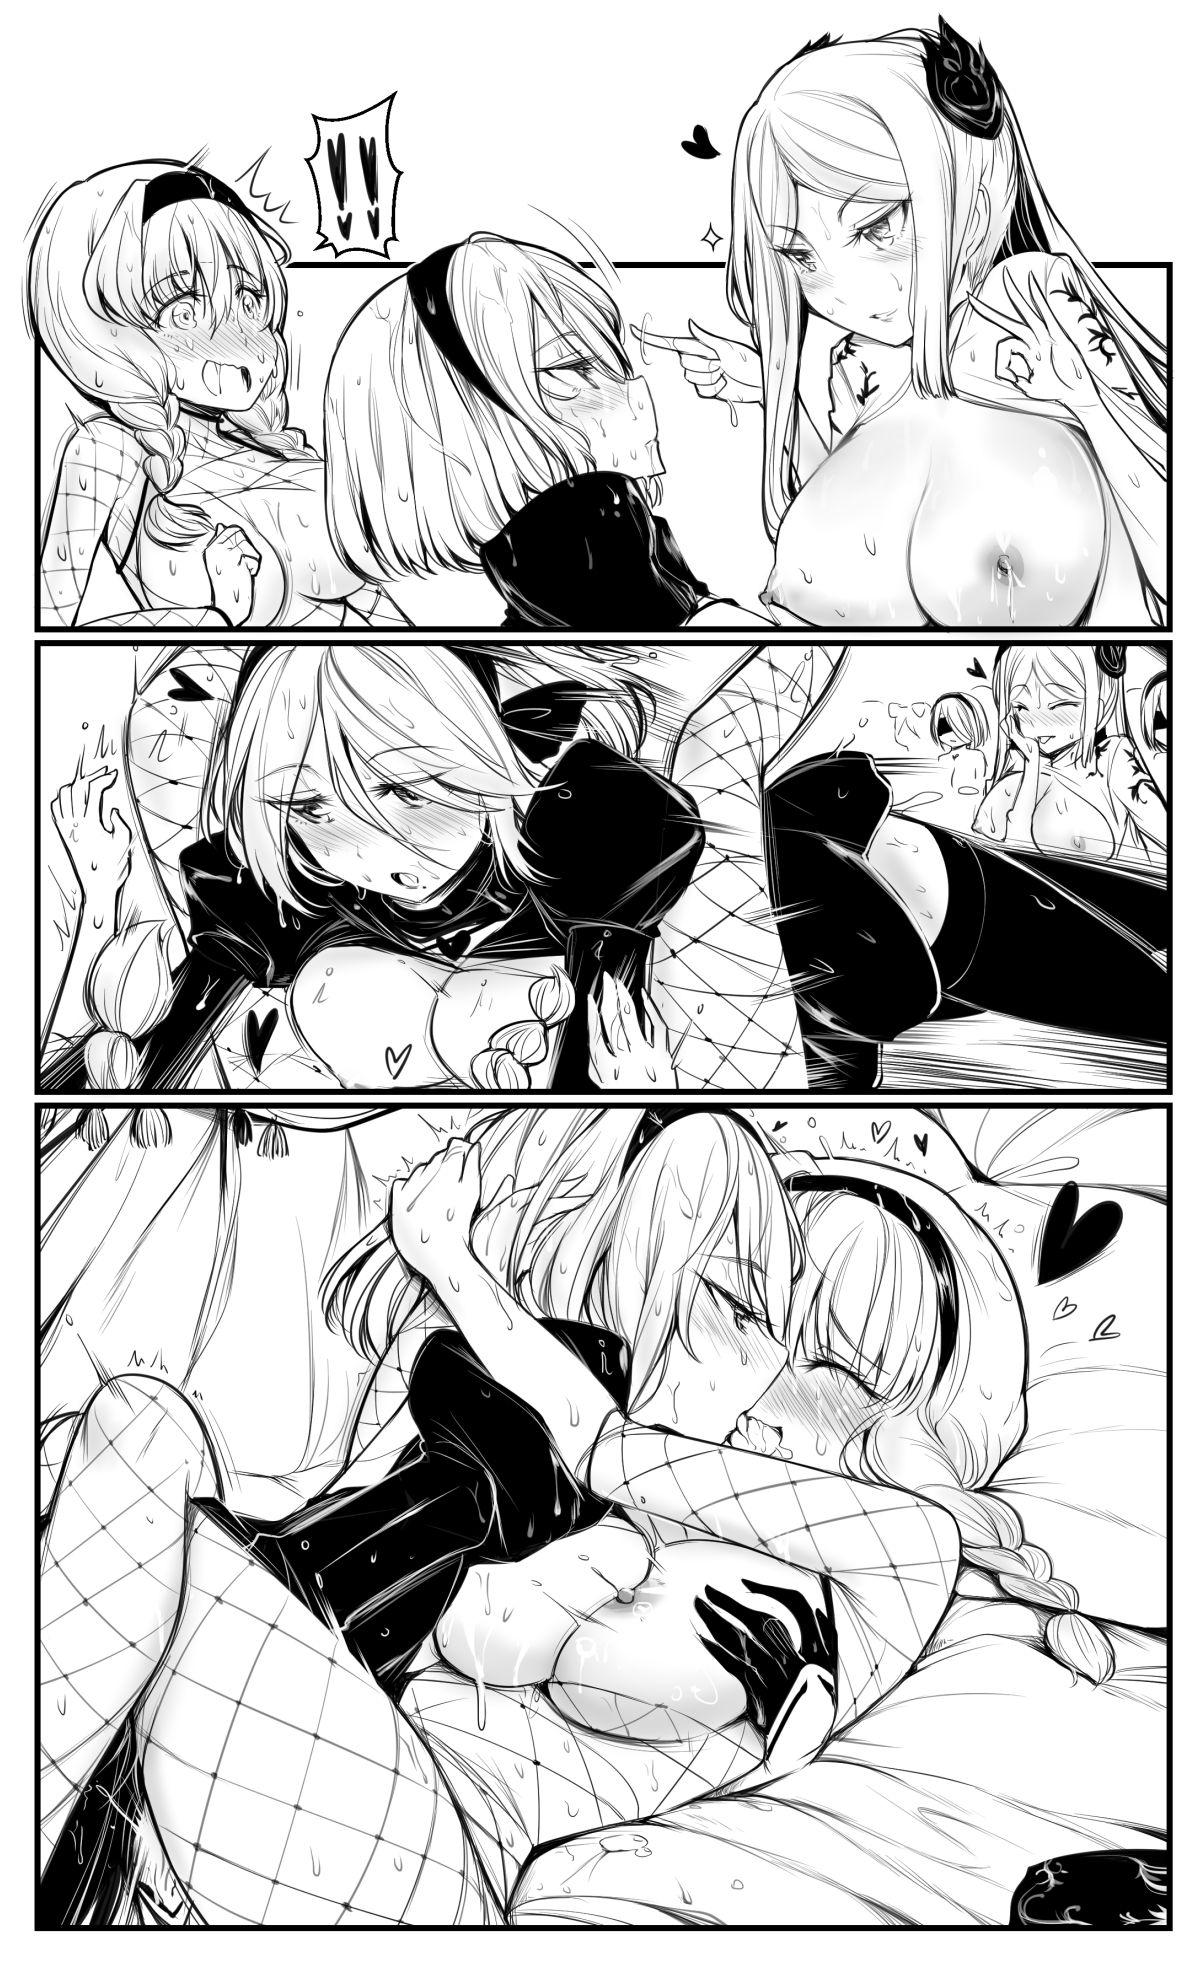 Hot Girls Getting Fucked New Support Units Nier Domina - Nier automata Socks - Page 7